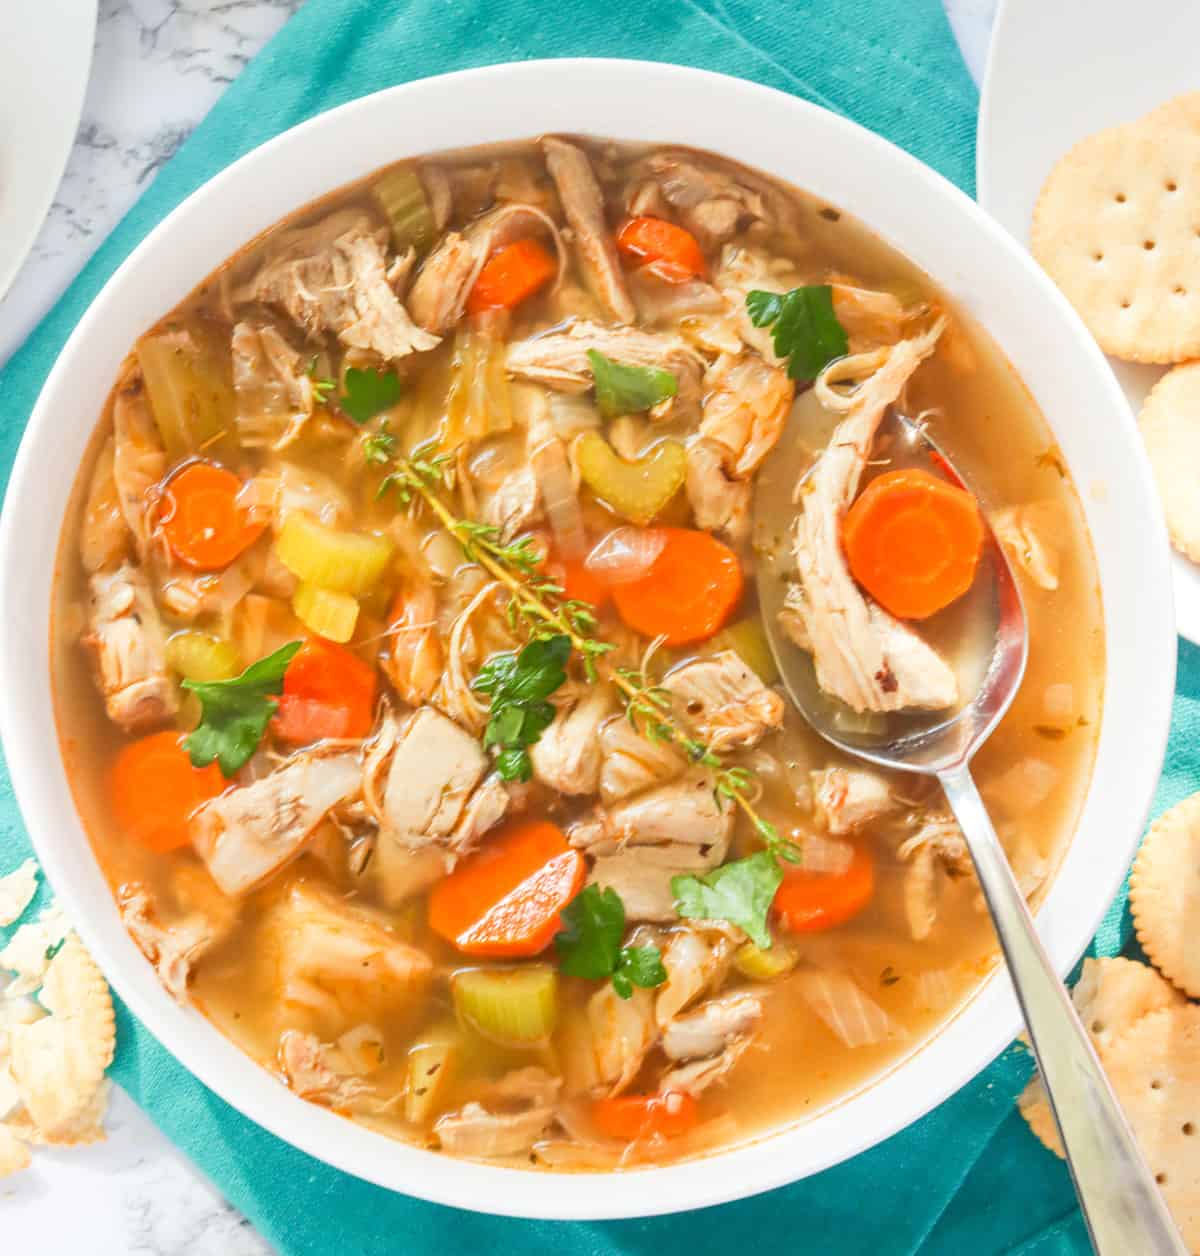 Enjoy a hearty bowl of chicken cabbage soup